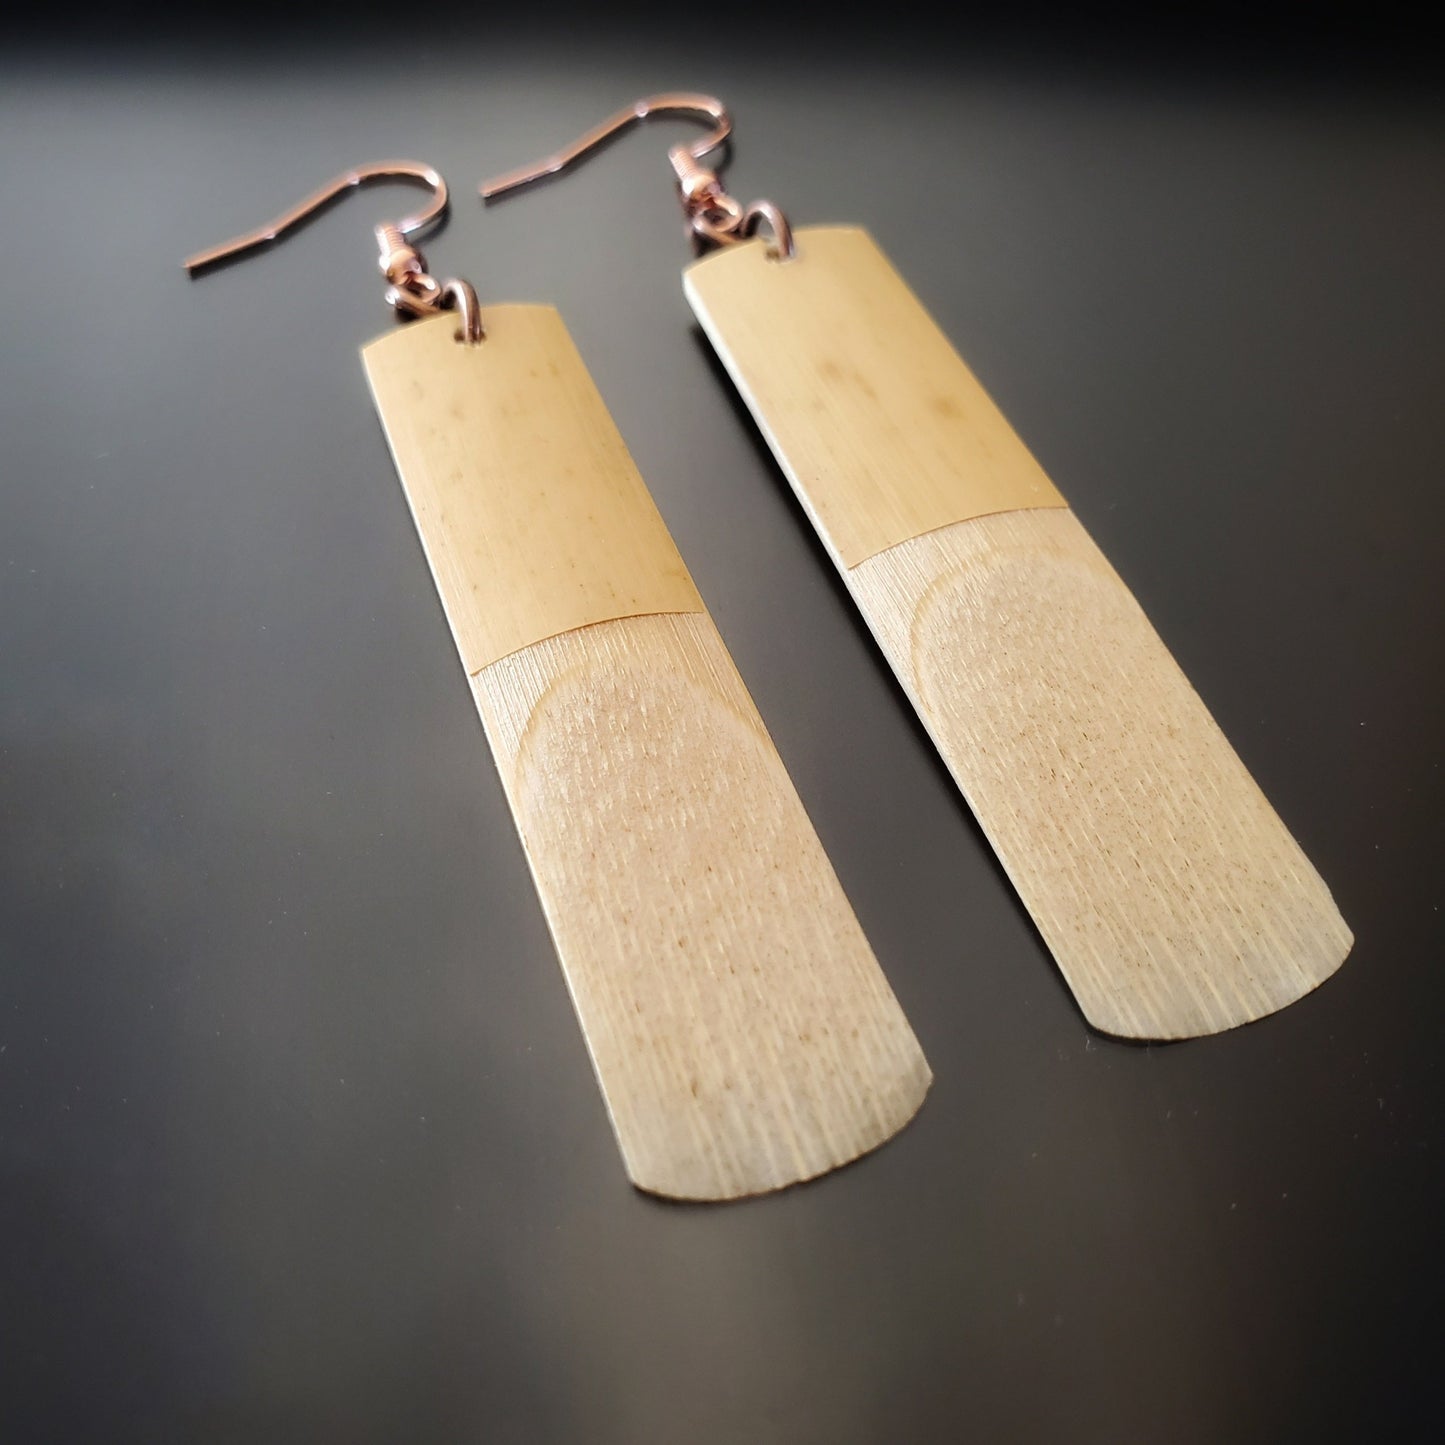 pair of earrings made from upcycled saxophone reeds